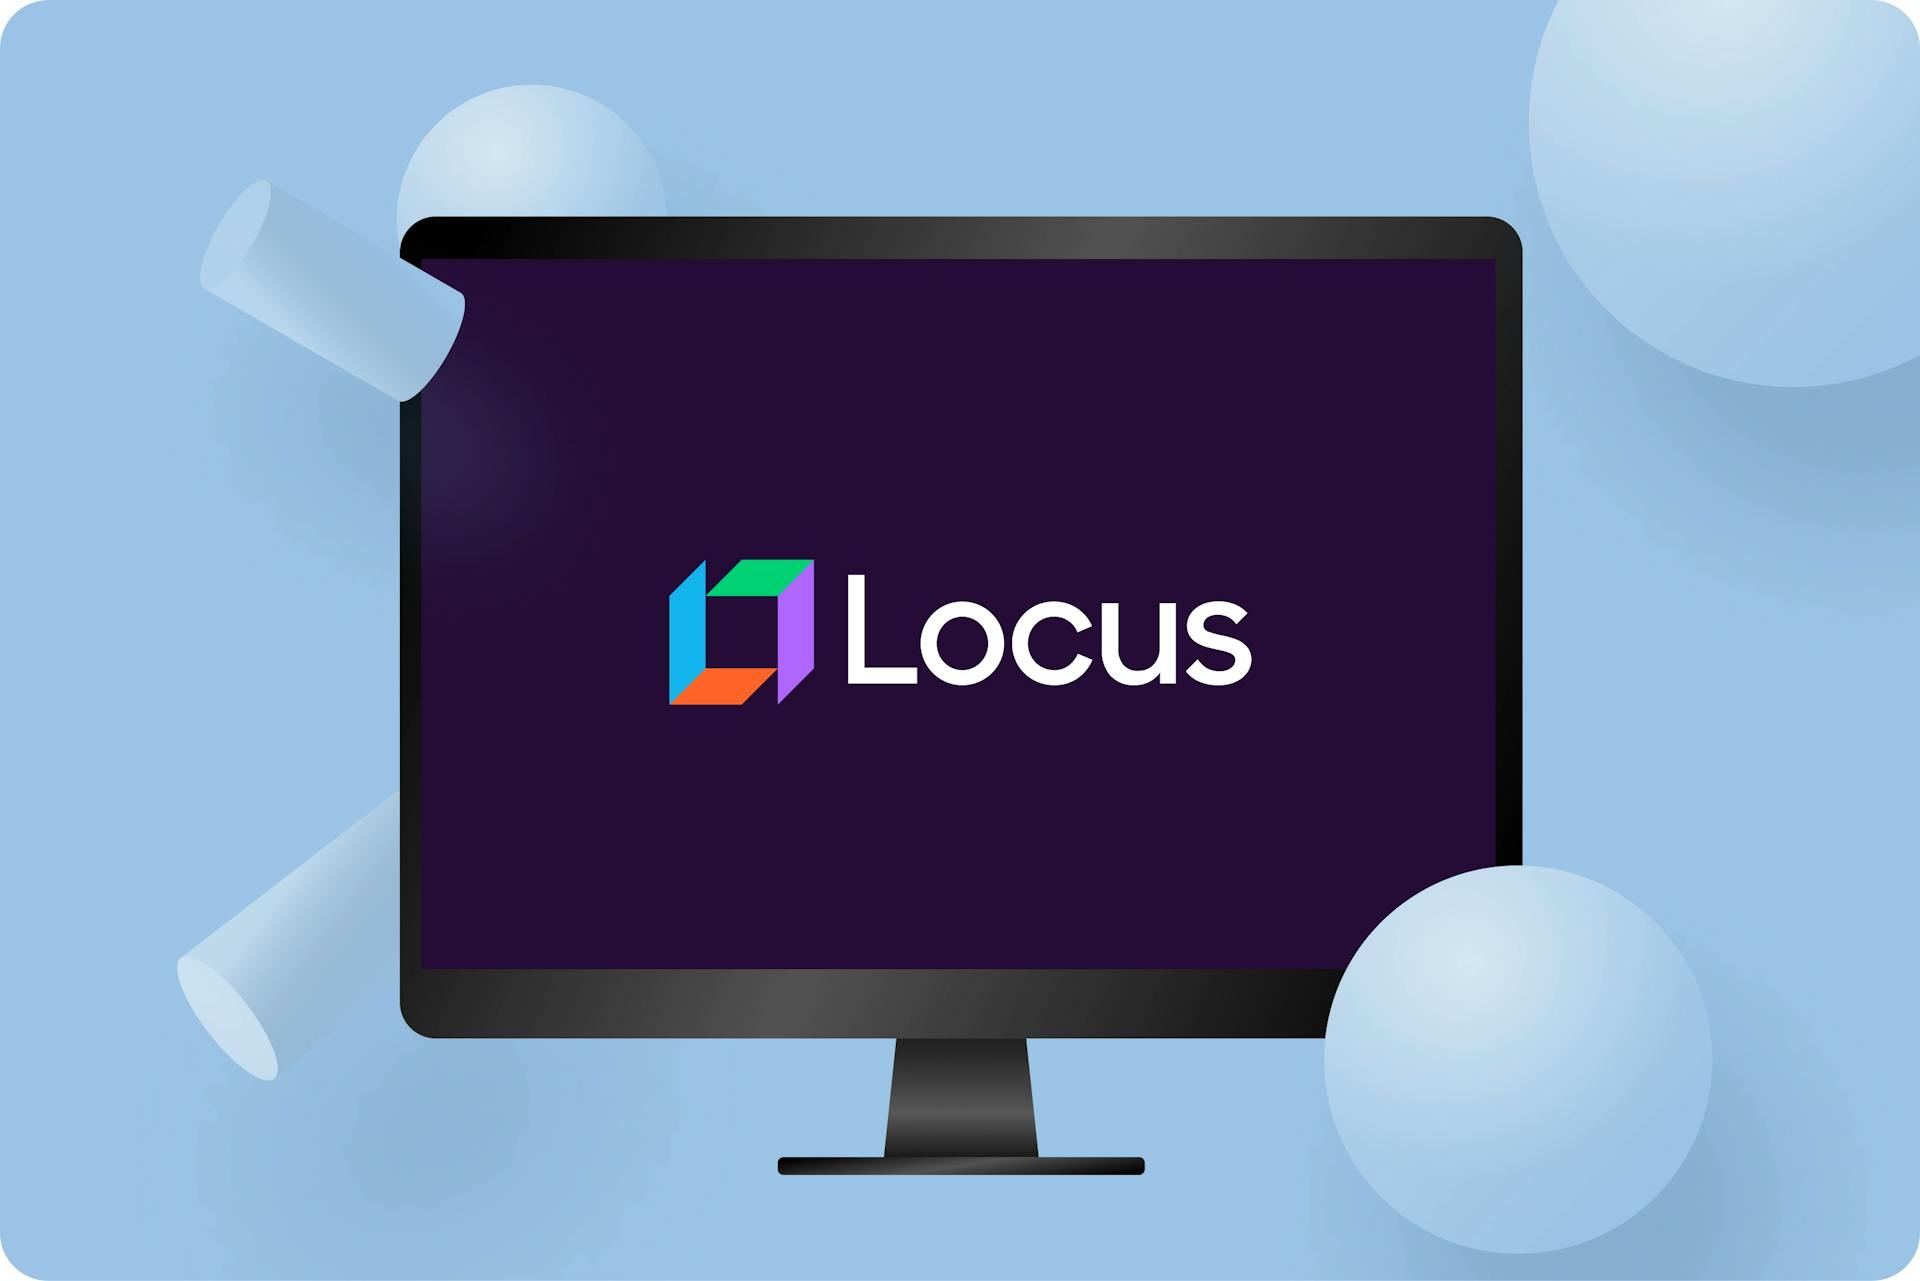 image of a laptop with Locus company logo